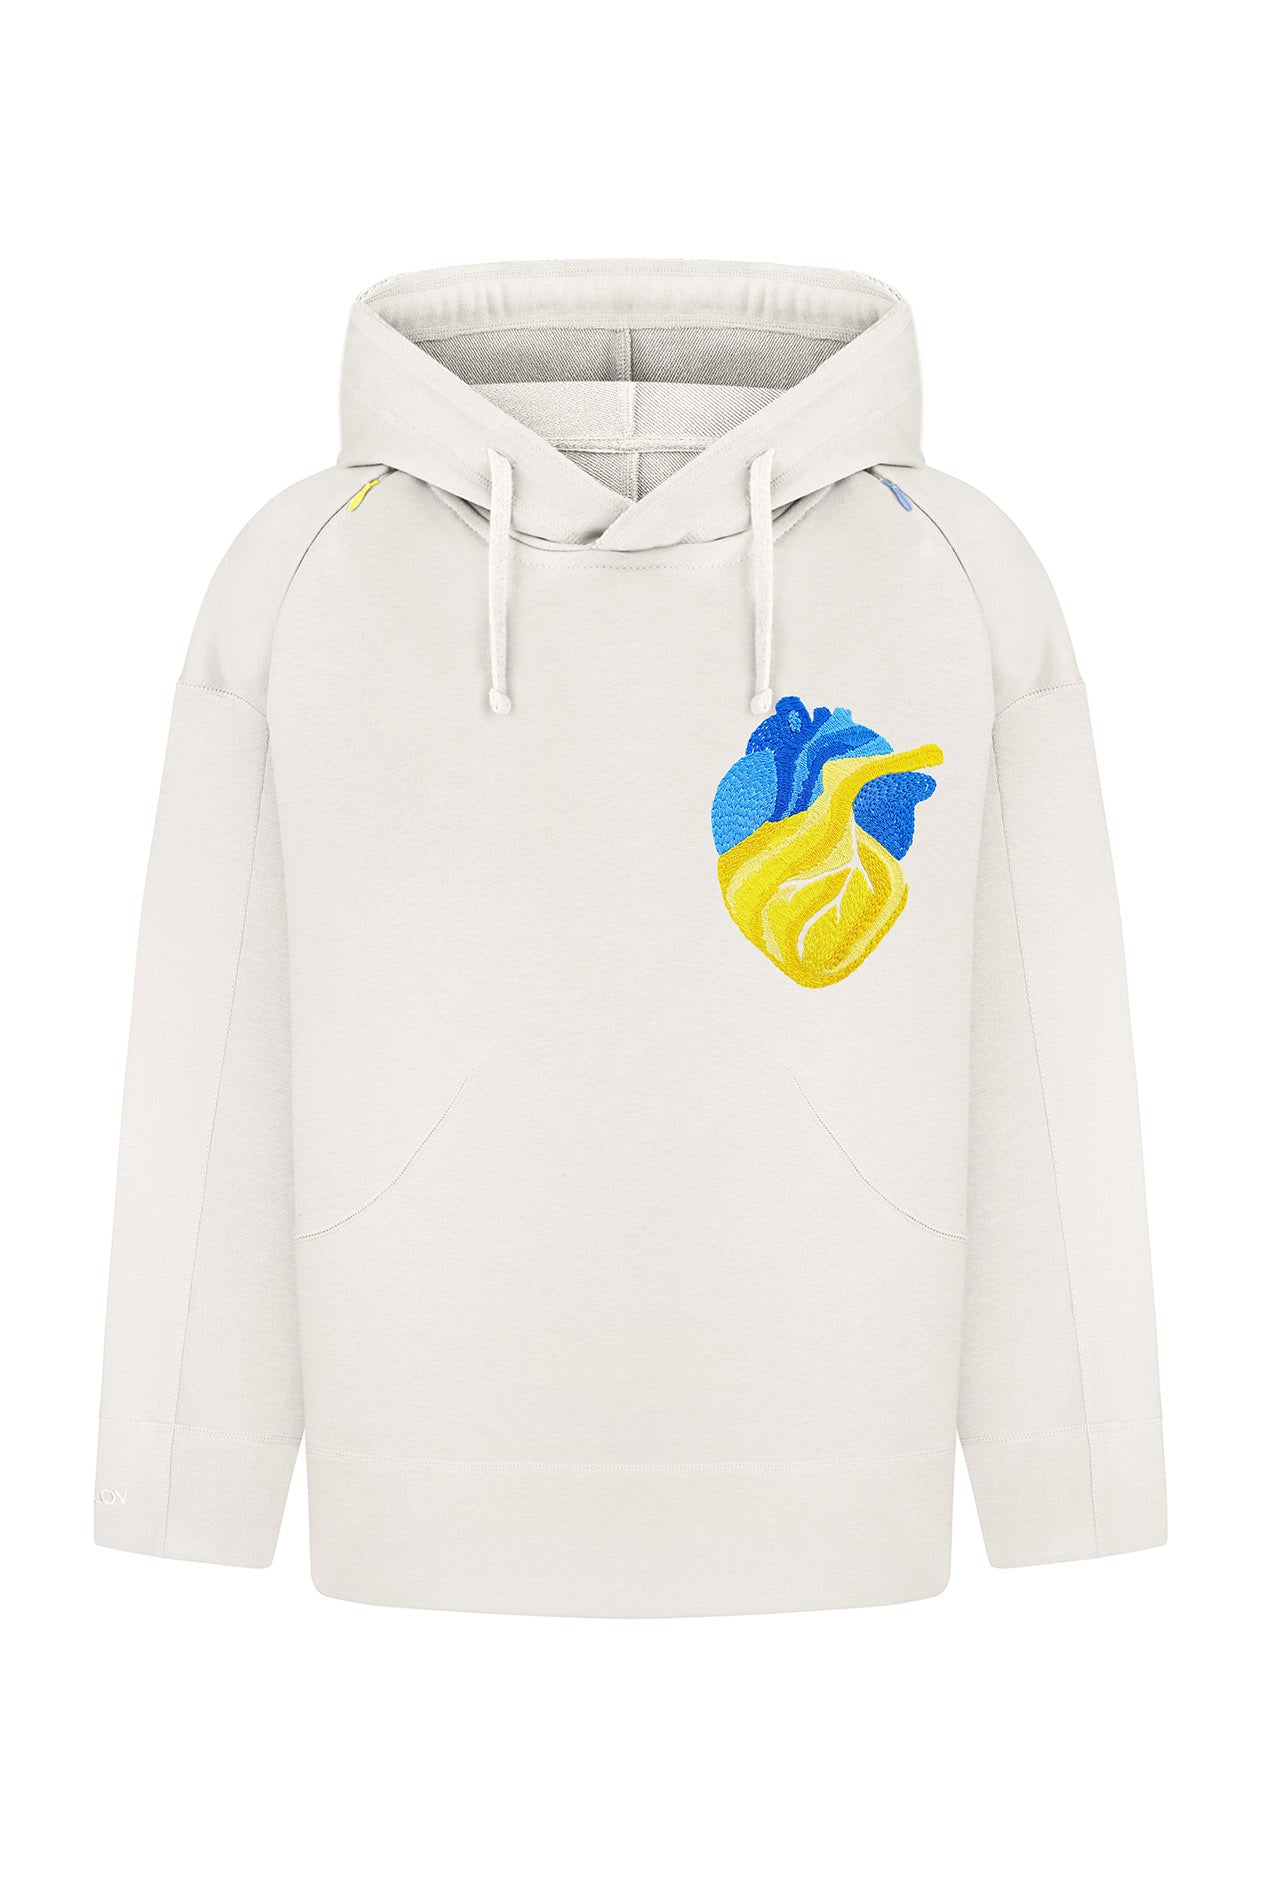 Hoodie with handmade heart embroidery (threads)